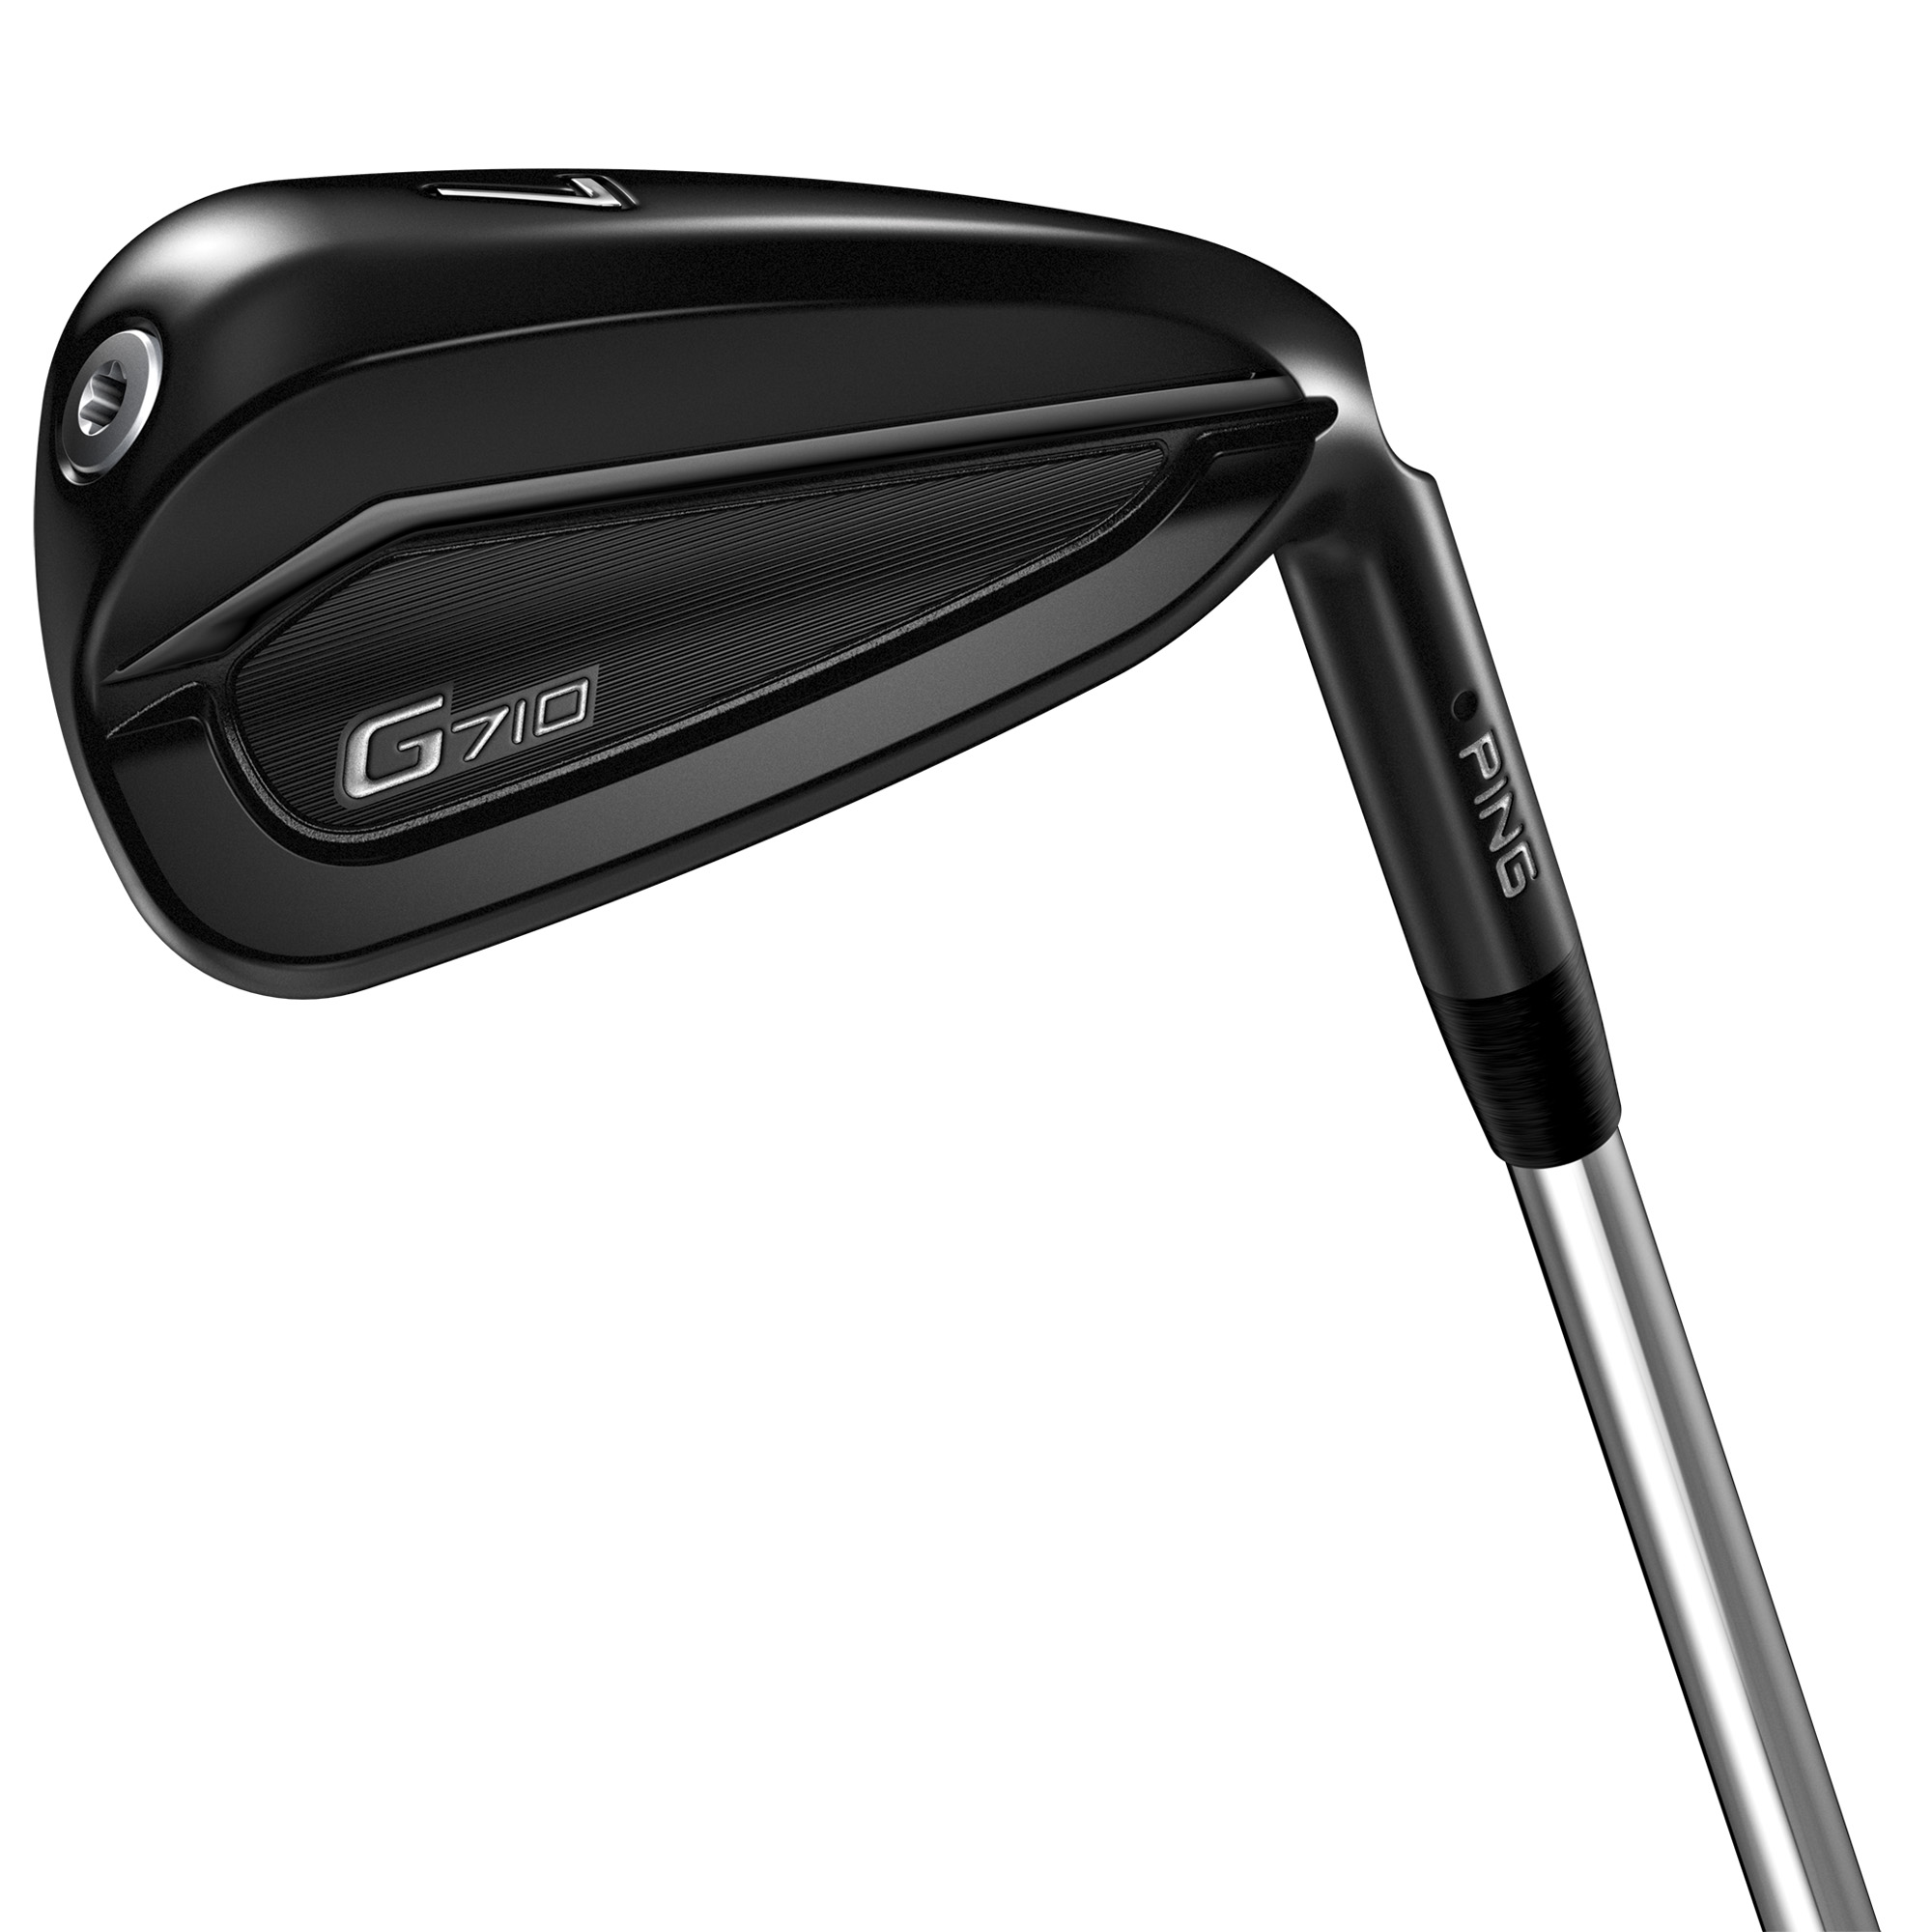 OEM supplied PING G710 club images - The GOLFTEC Scramble